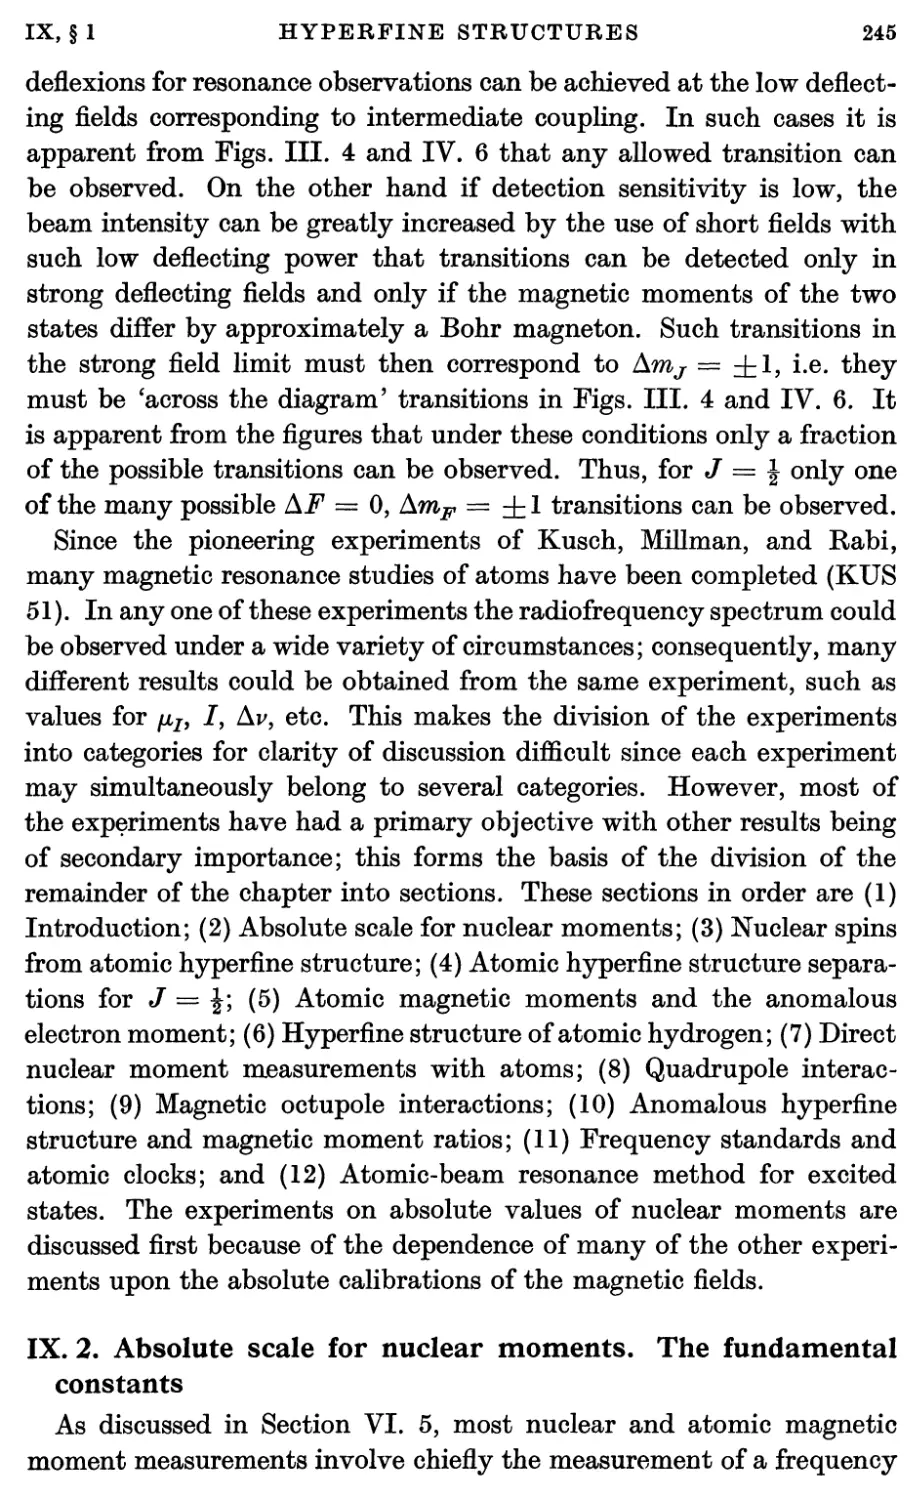 IX.2. Absolute Scale for Nuclear Moments. The Fundamental Constants